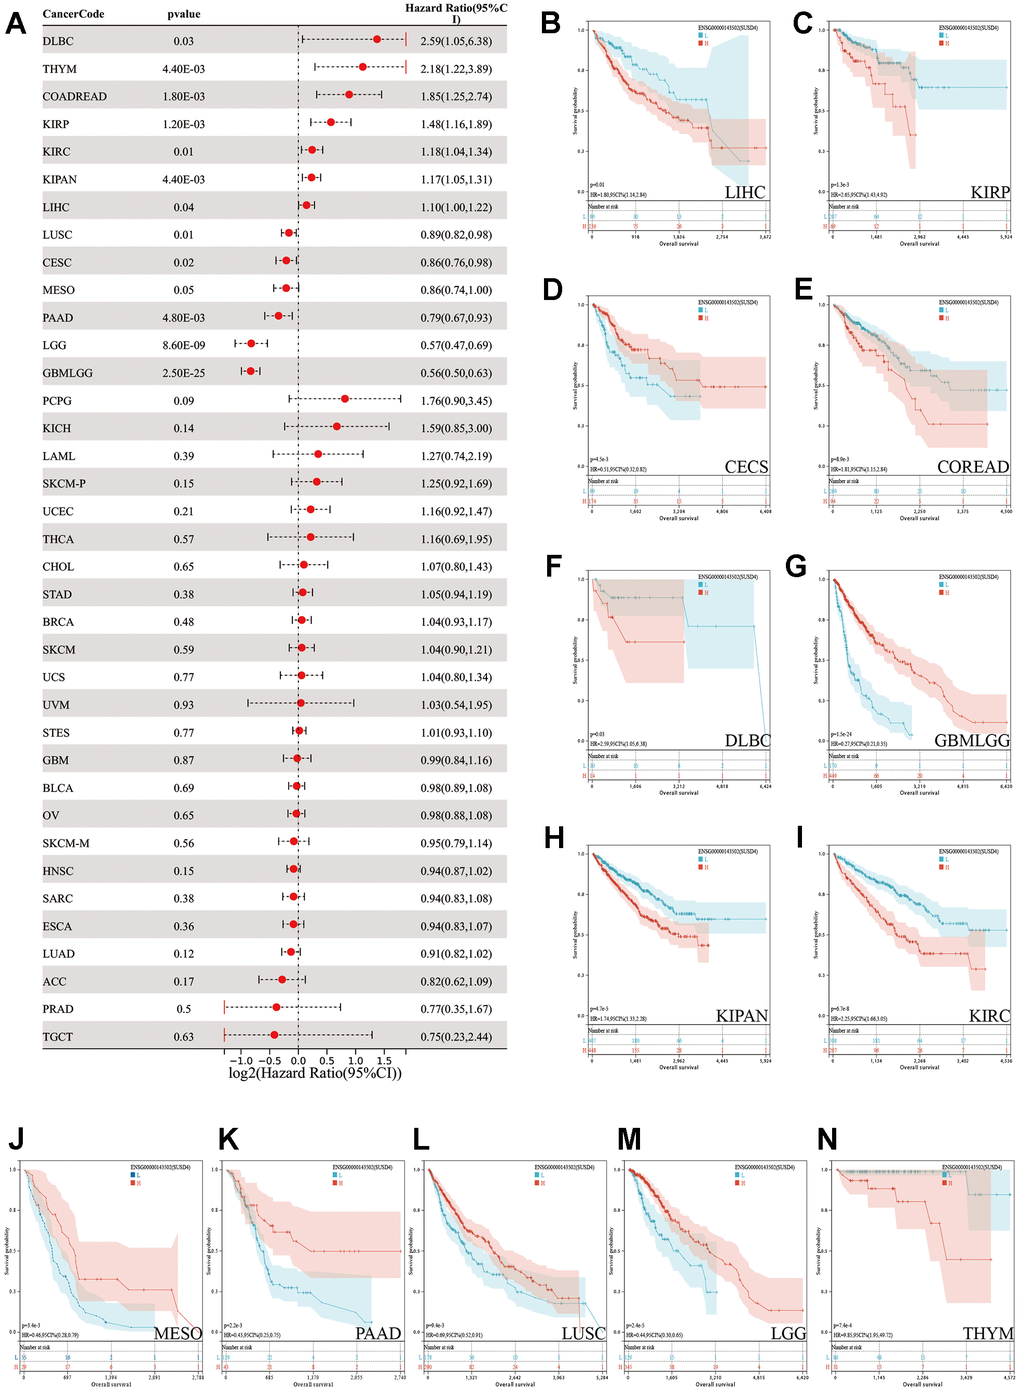 Pan-cancer survival analysis of SUSD4. (A) Forest plot of the pan-cancer survival analysis. (B–N) The Kaplan-Meier plot of TCGA pan-cancer survival profiles with significant differences. The red and blue line represents high and low SUSD4 expression group respectively. HR, hazard radio. CI, confidence interval.